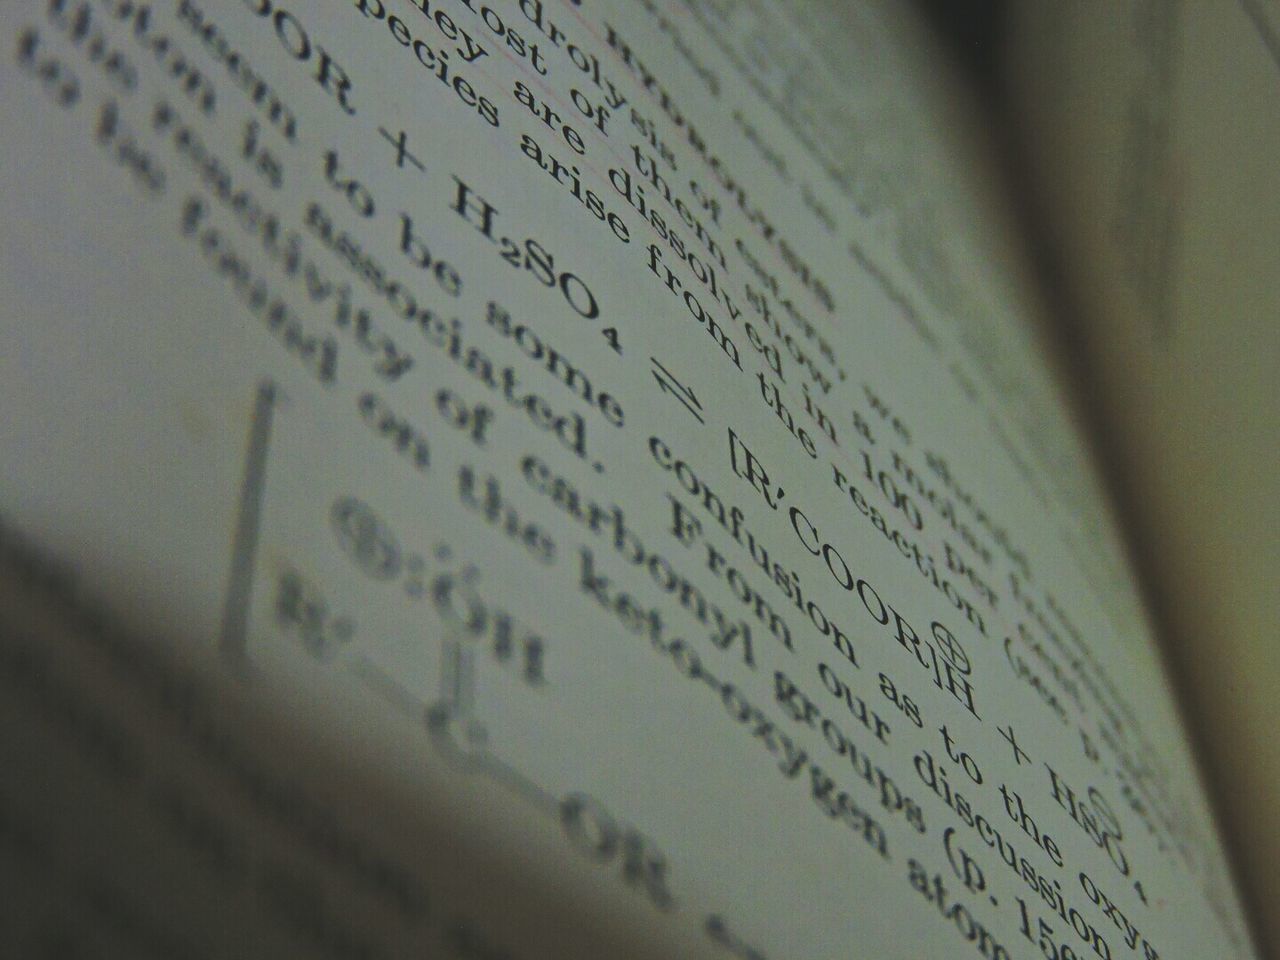 CLOSE-UP OF TEXT WRITTEN ON PAPER WITH PAPERS